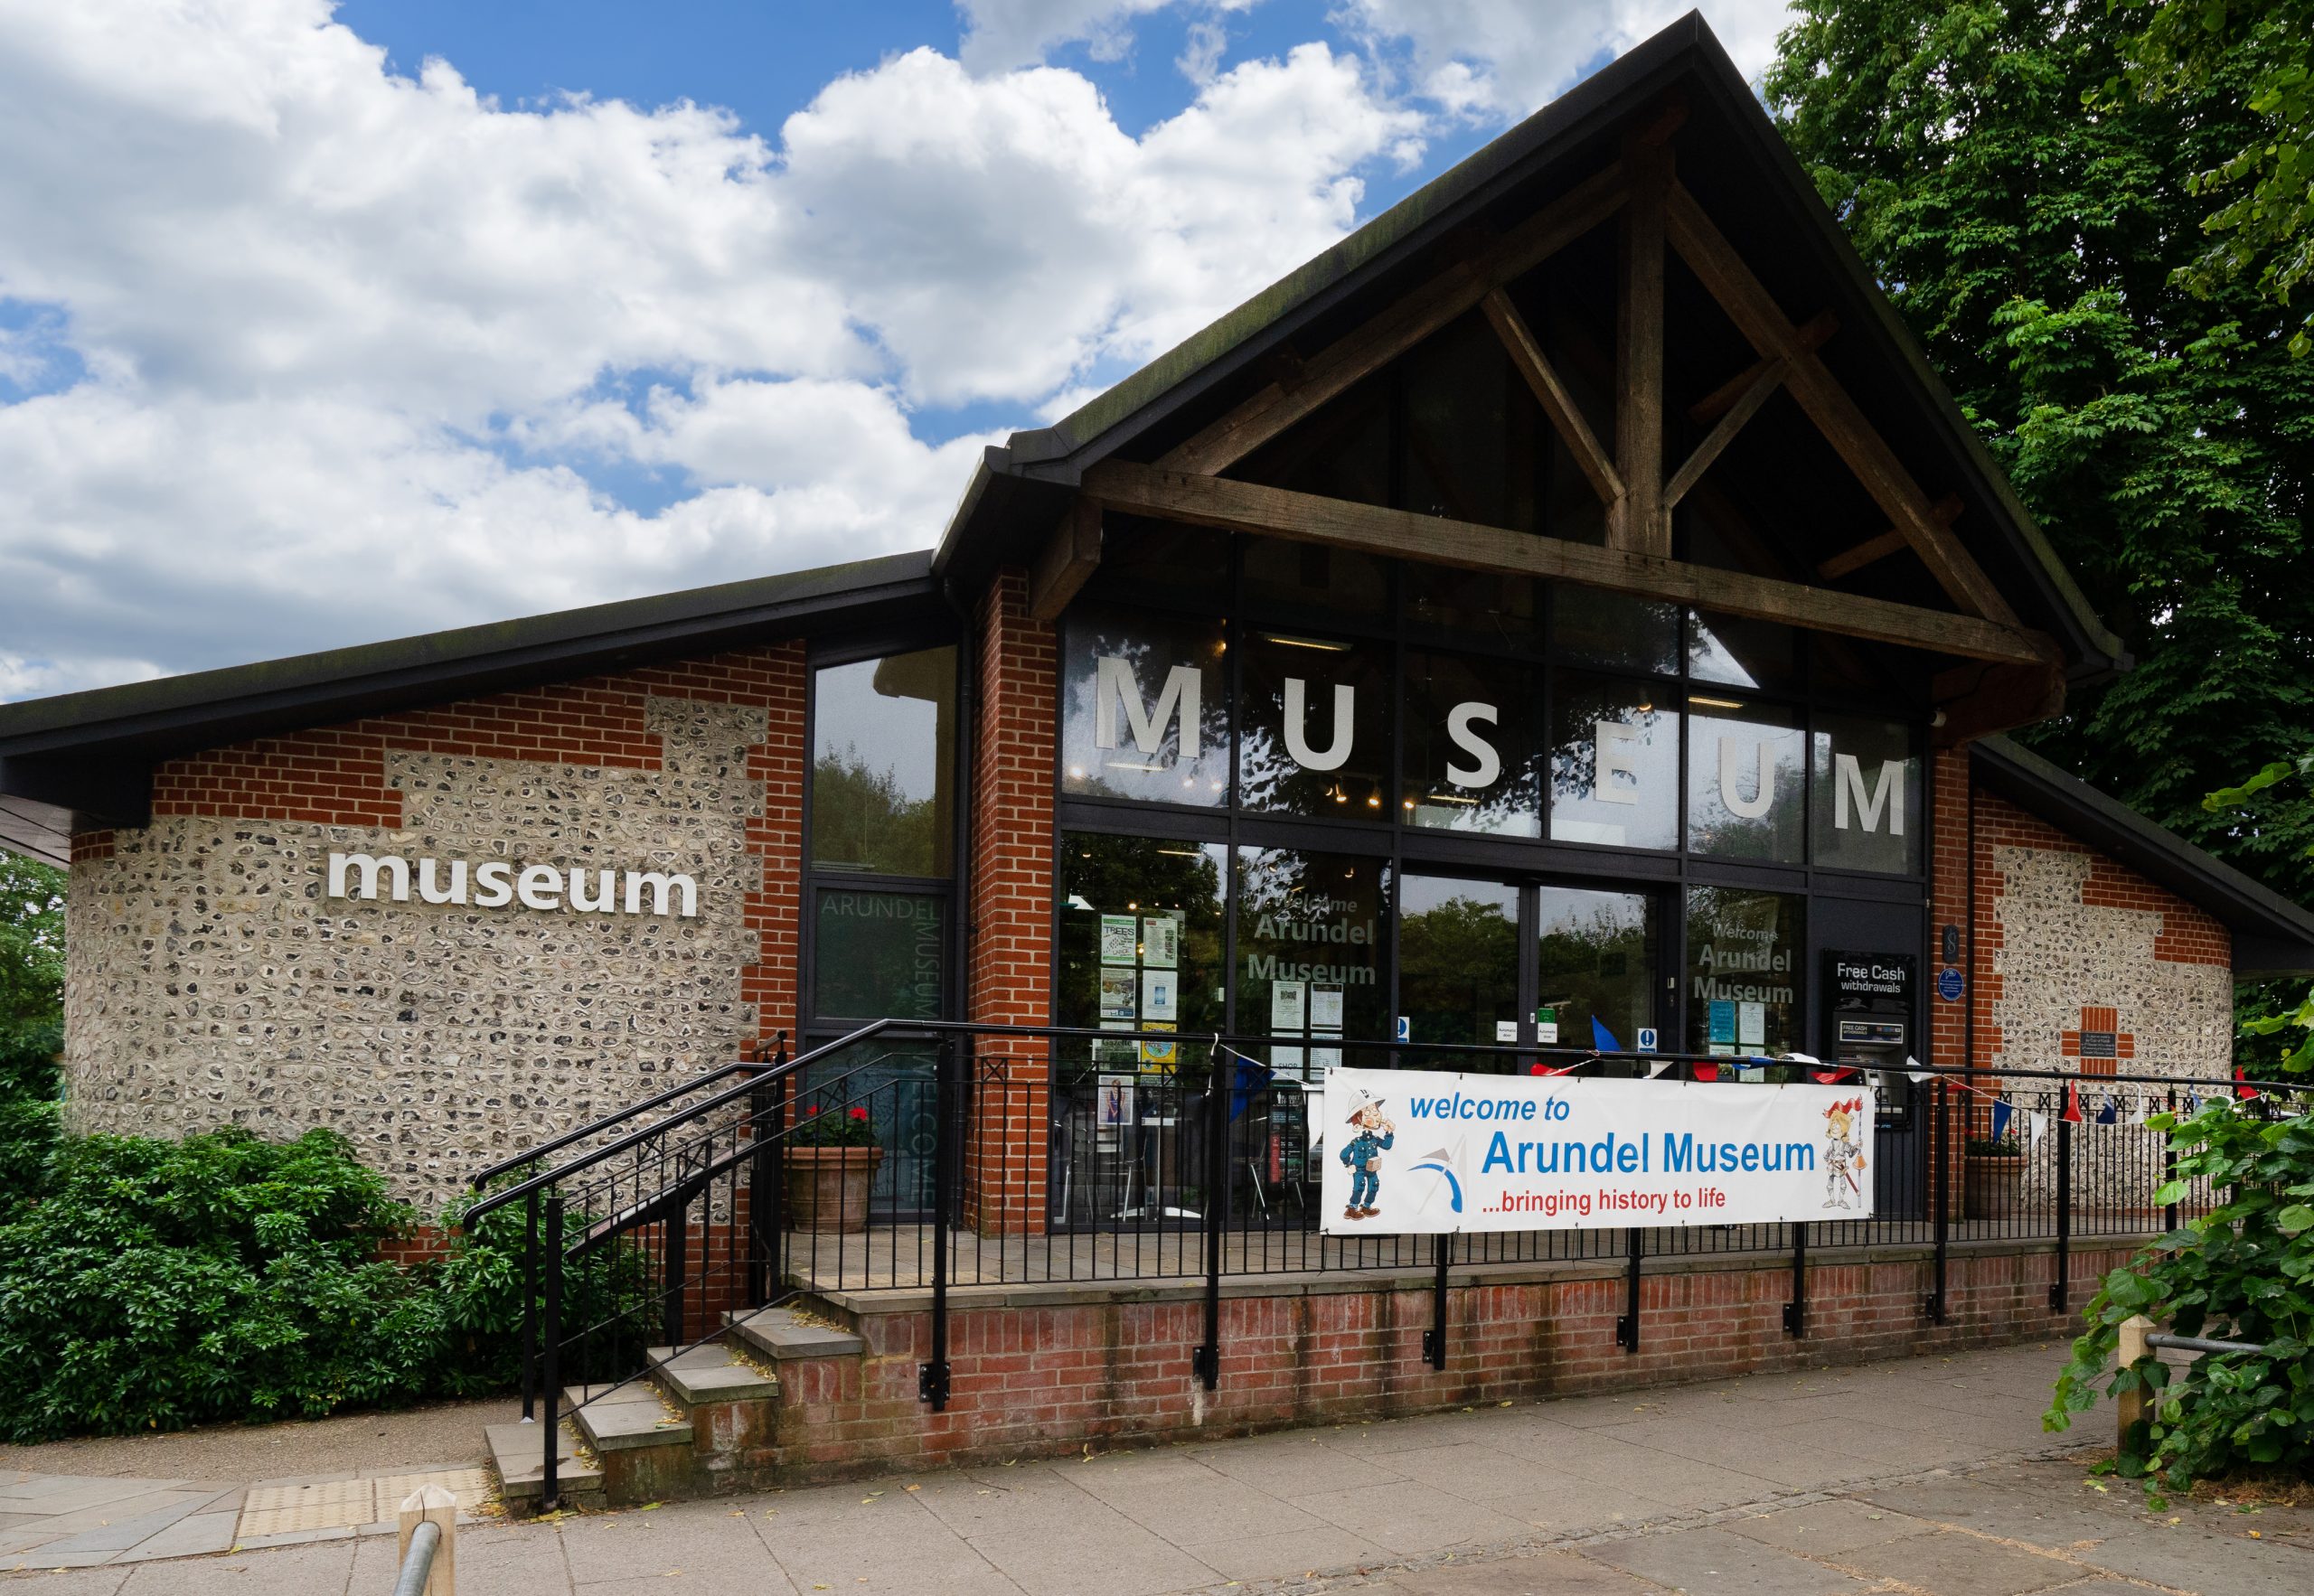 Arundel Museum – We’d like to hear from you!